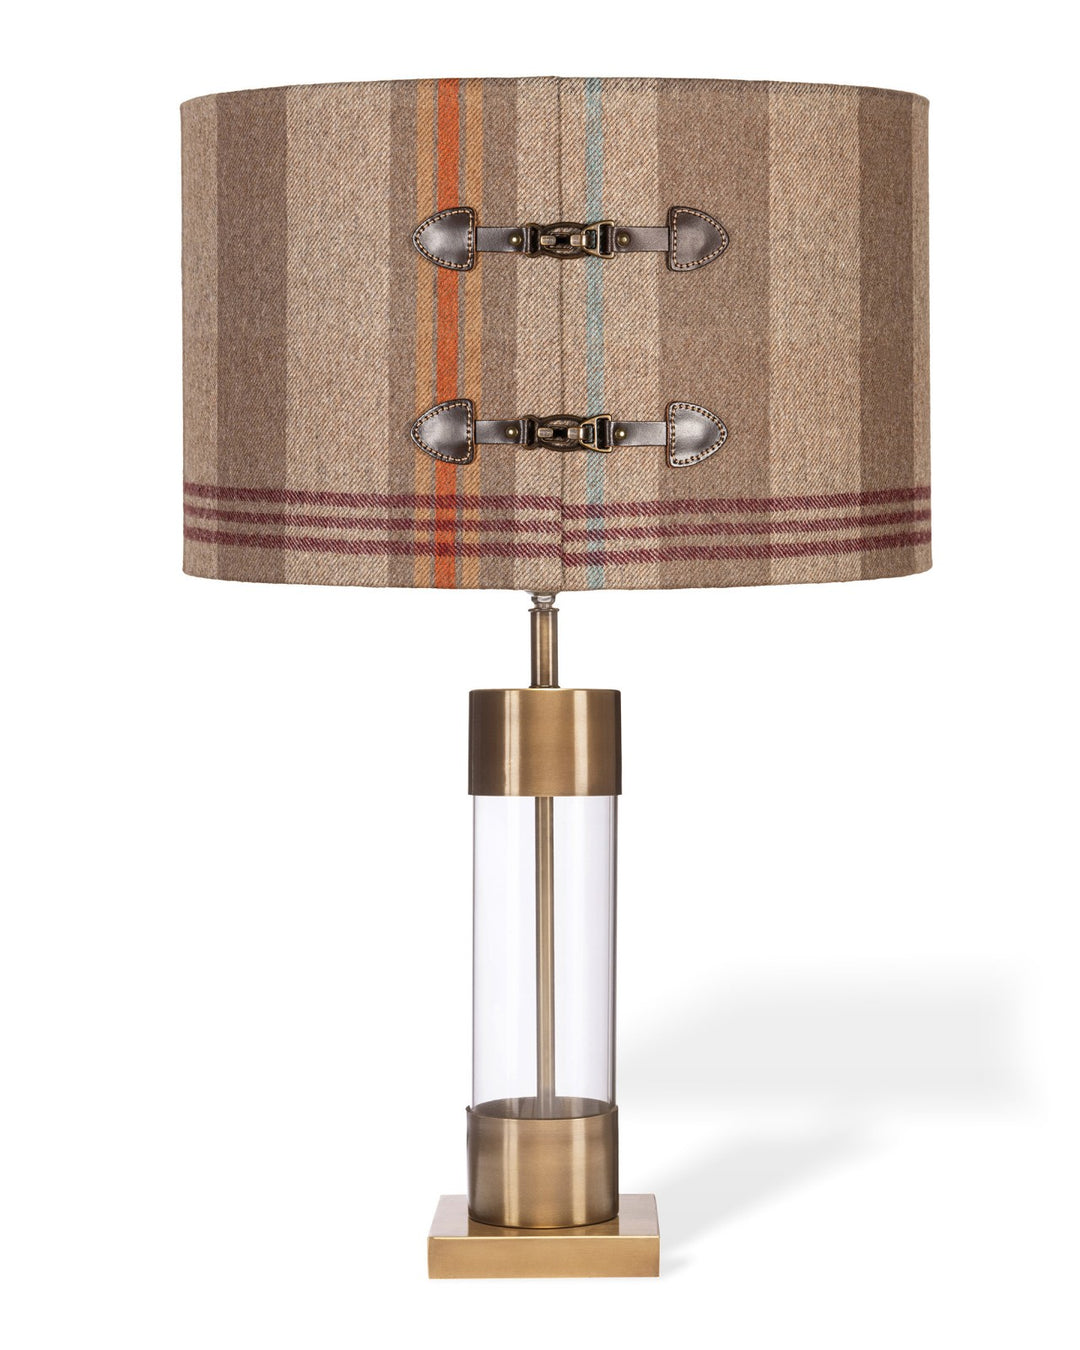 mind-the-gap-tyrol-chalet-wool-leather-buckets-lampshade-wool-with-buckles-gold-lining-tartan-plaid-suit-stripe-standard-lamp-shade